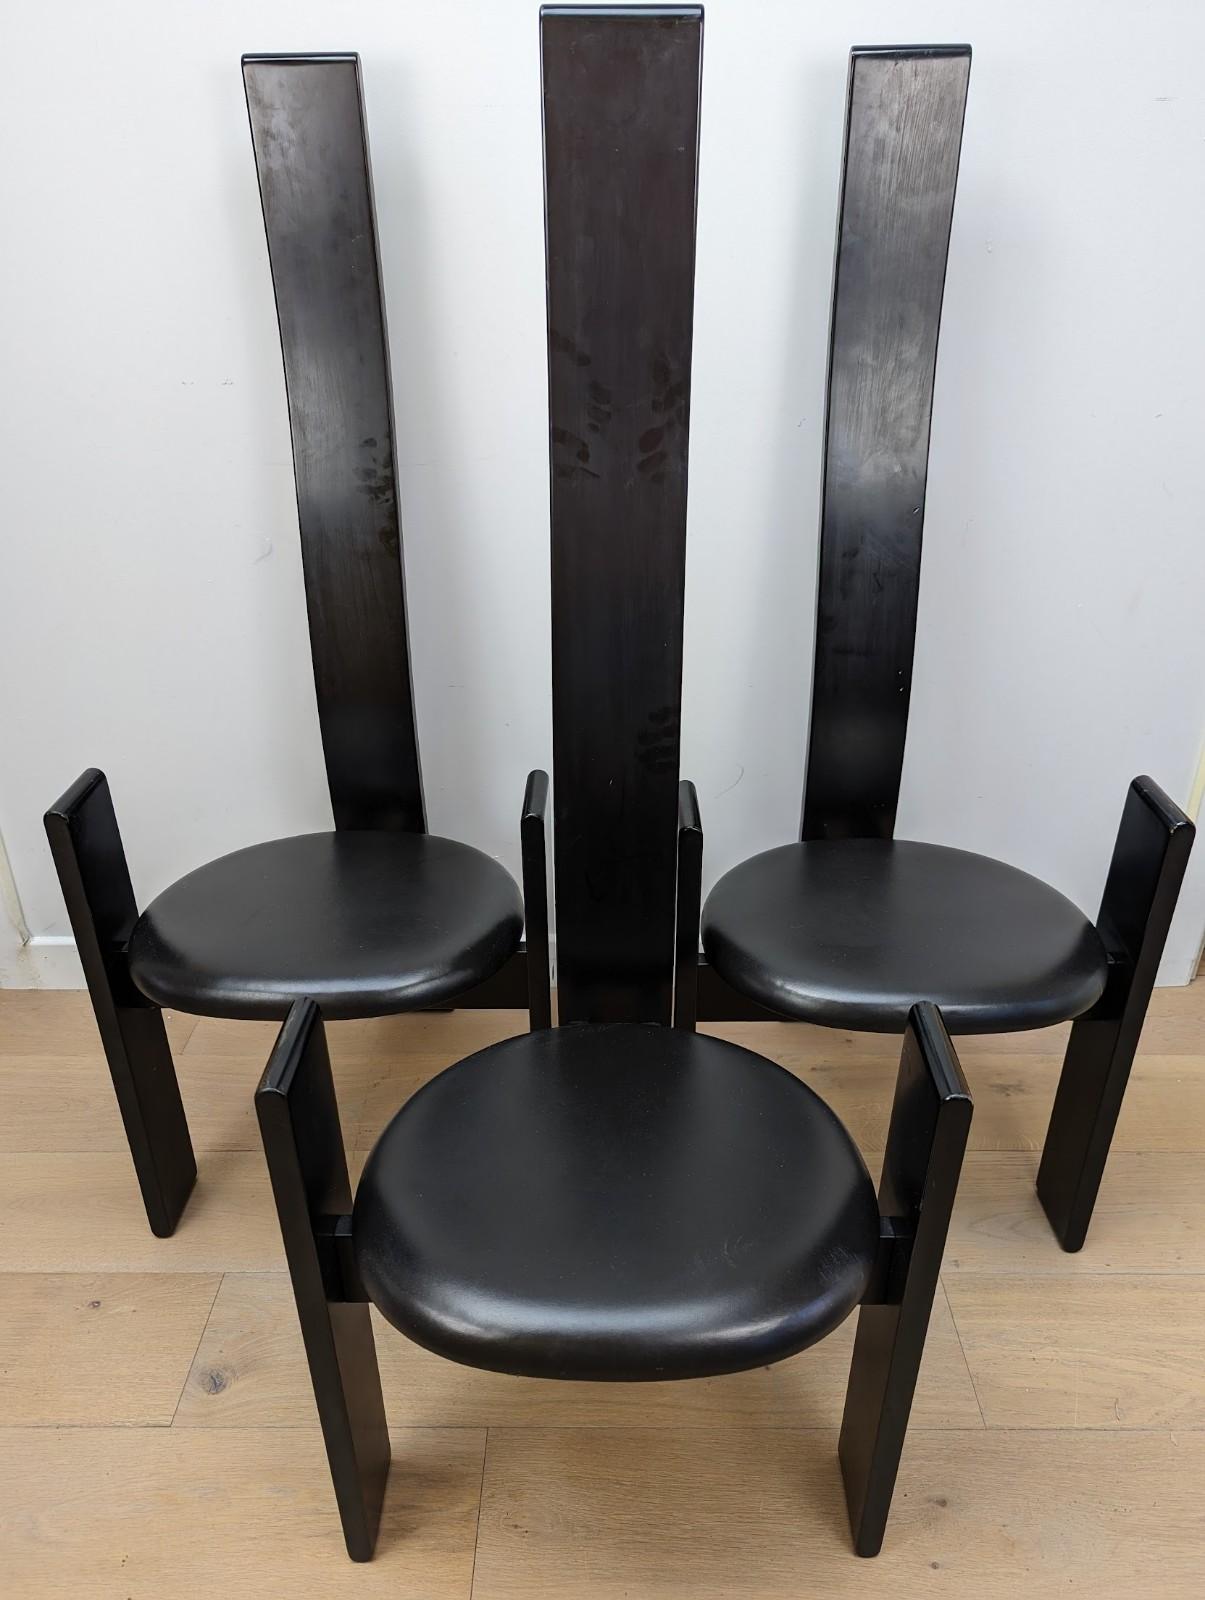 Post-Modern Set of 4 Dining Chairs Model 'Golem' Designed by Vico Magistretti for Poggi